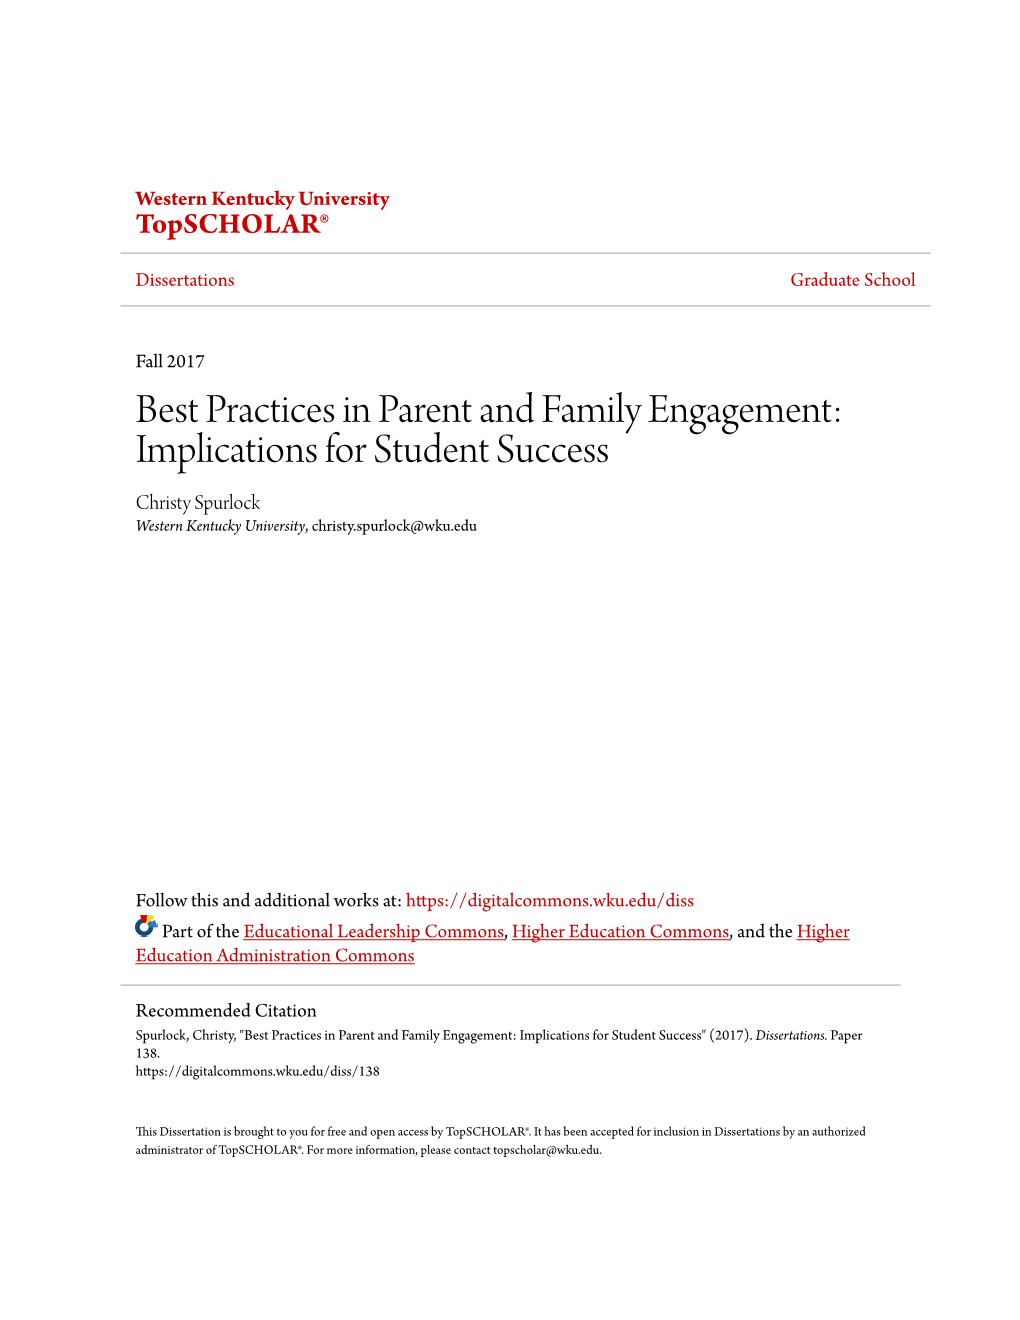 Best Practices in Parent and Family Engagement: Implications for Student Success Christy Spurlock Western Kentucky University, Christy.Spurlock@Wku.Edu